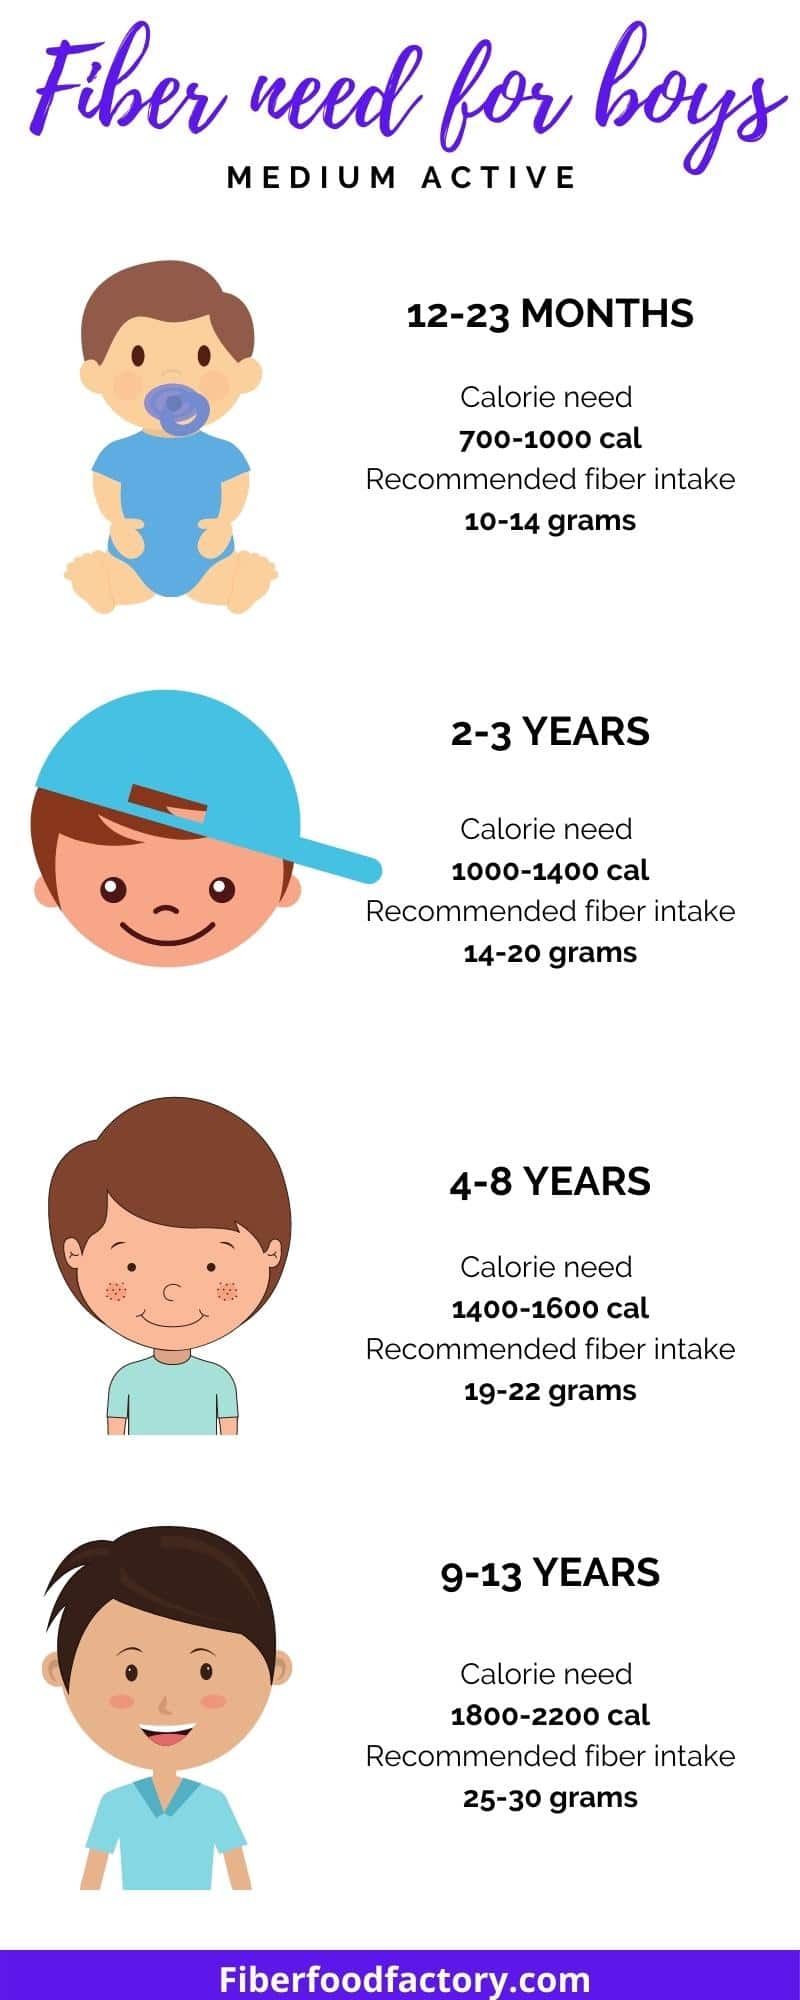 infographic fiber need boys in different ages.